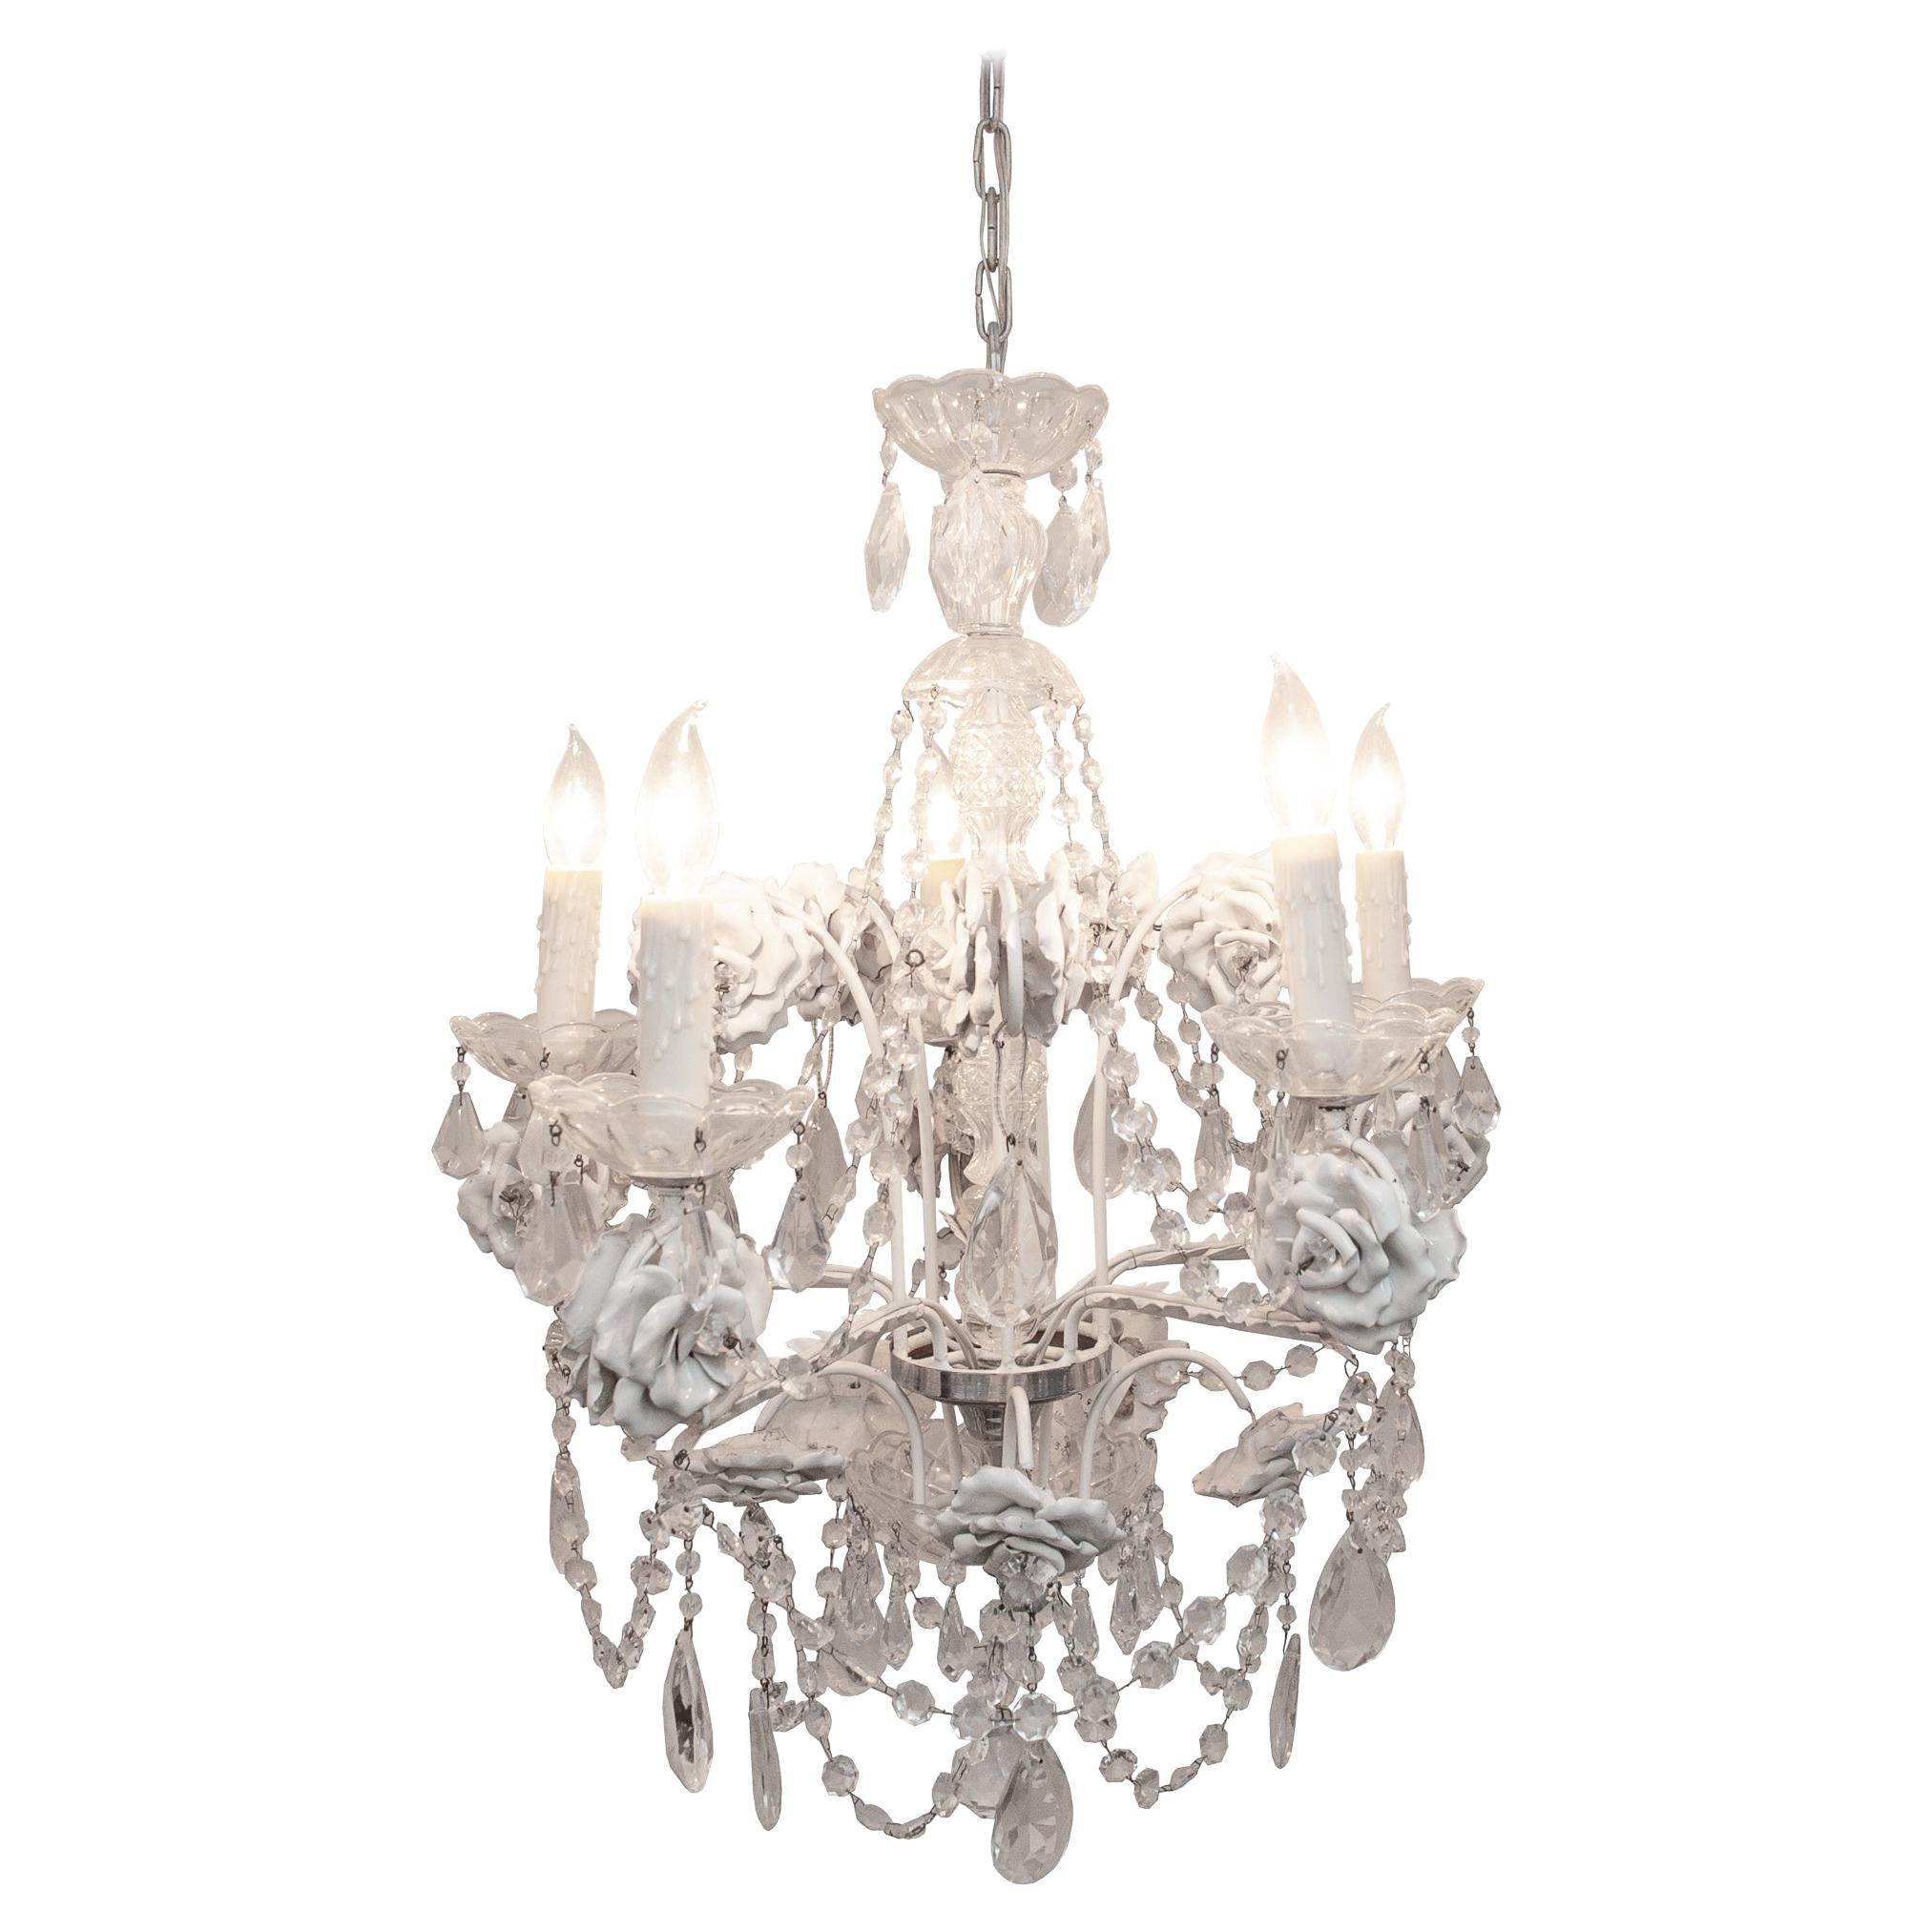 Antique French Crystal Chandelier with White Metal & Glazed White Metal Roses For Sale